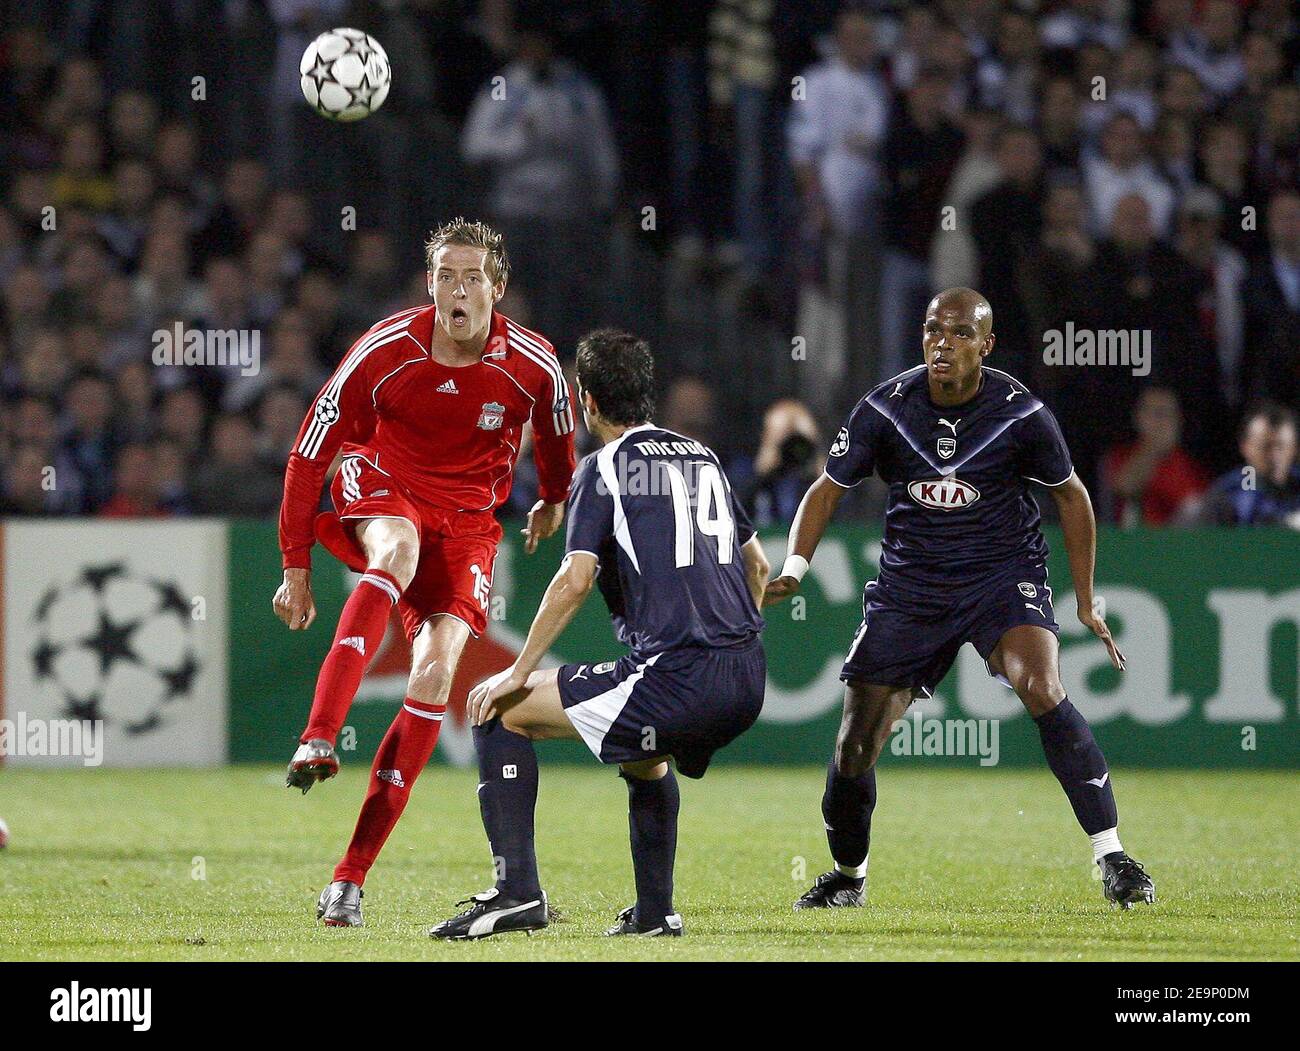 Liverpool's Peter Crouch battles for the ball during the UEFA Champions League, Group C, Girondins de Bordeaux vs Liverpool FC at the Stade Chaban-Delmas in Bordeaux, France on October 18, 2006. Liverpool won 1-0. Photo by Christian Liewig/ABACAPRESS.COM Stock Photo